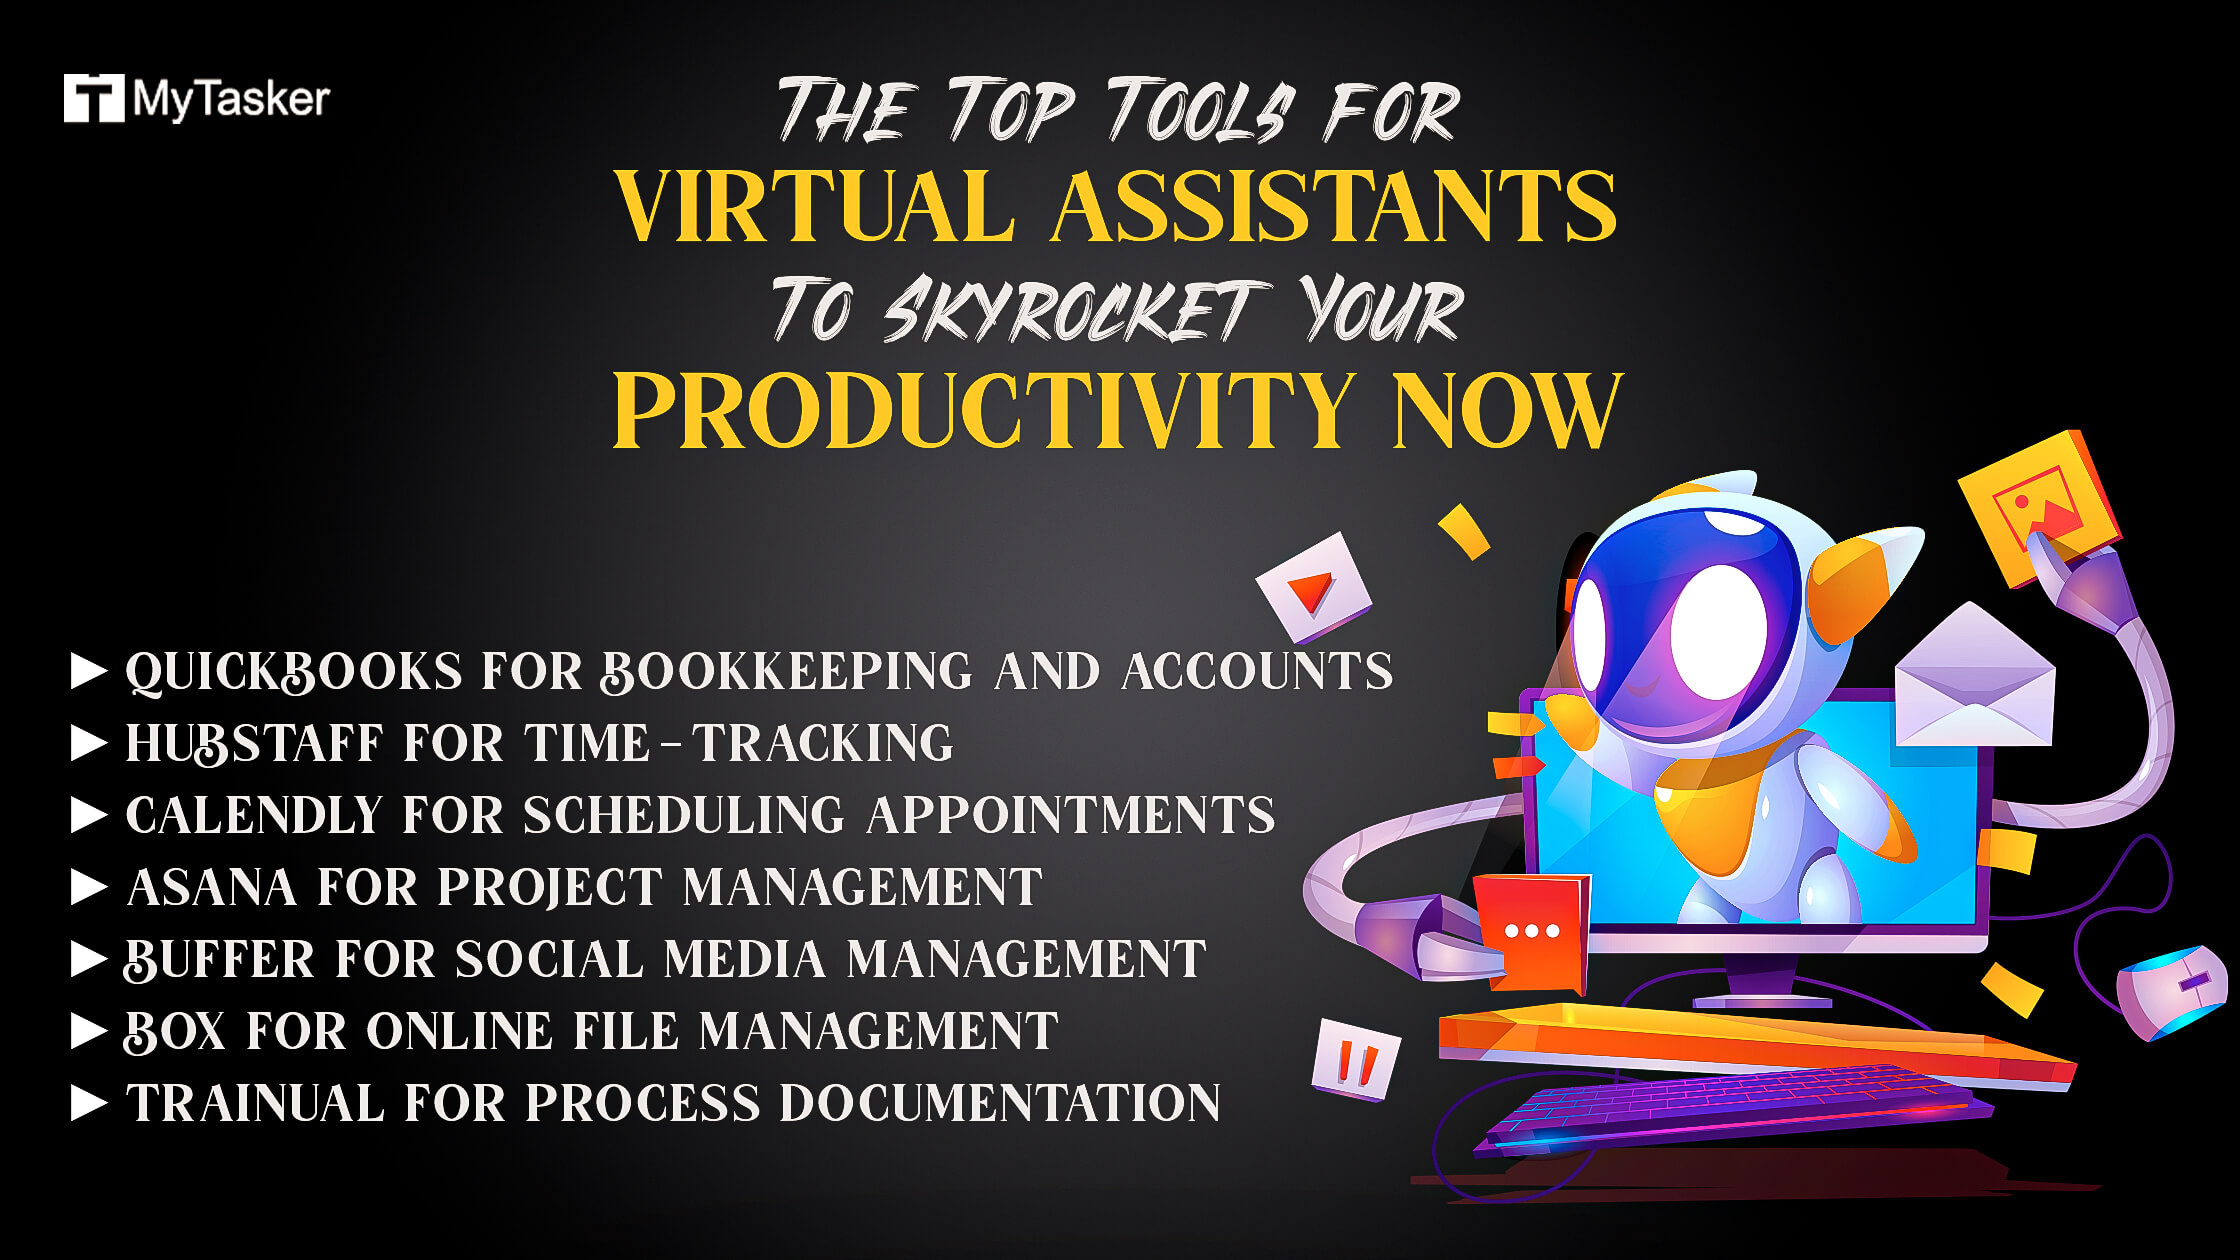 The Top Tools for Virtual Assistants To Skyrocket Your Productivity Now